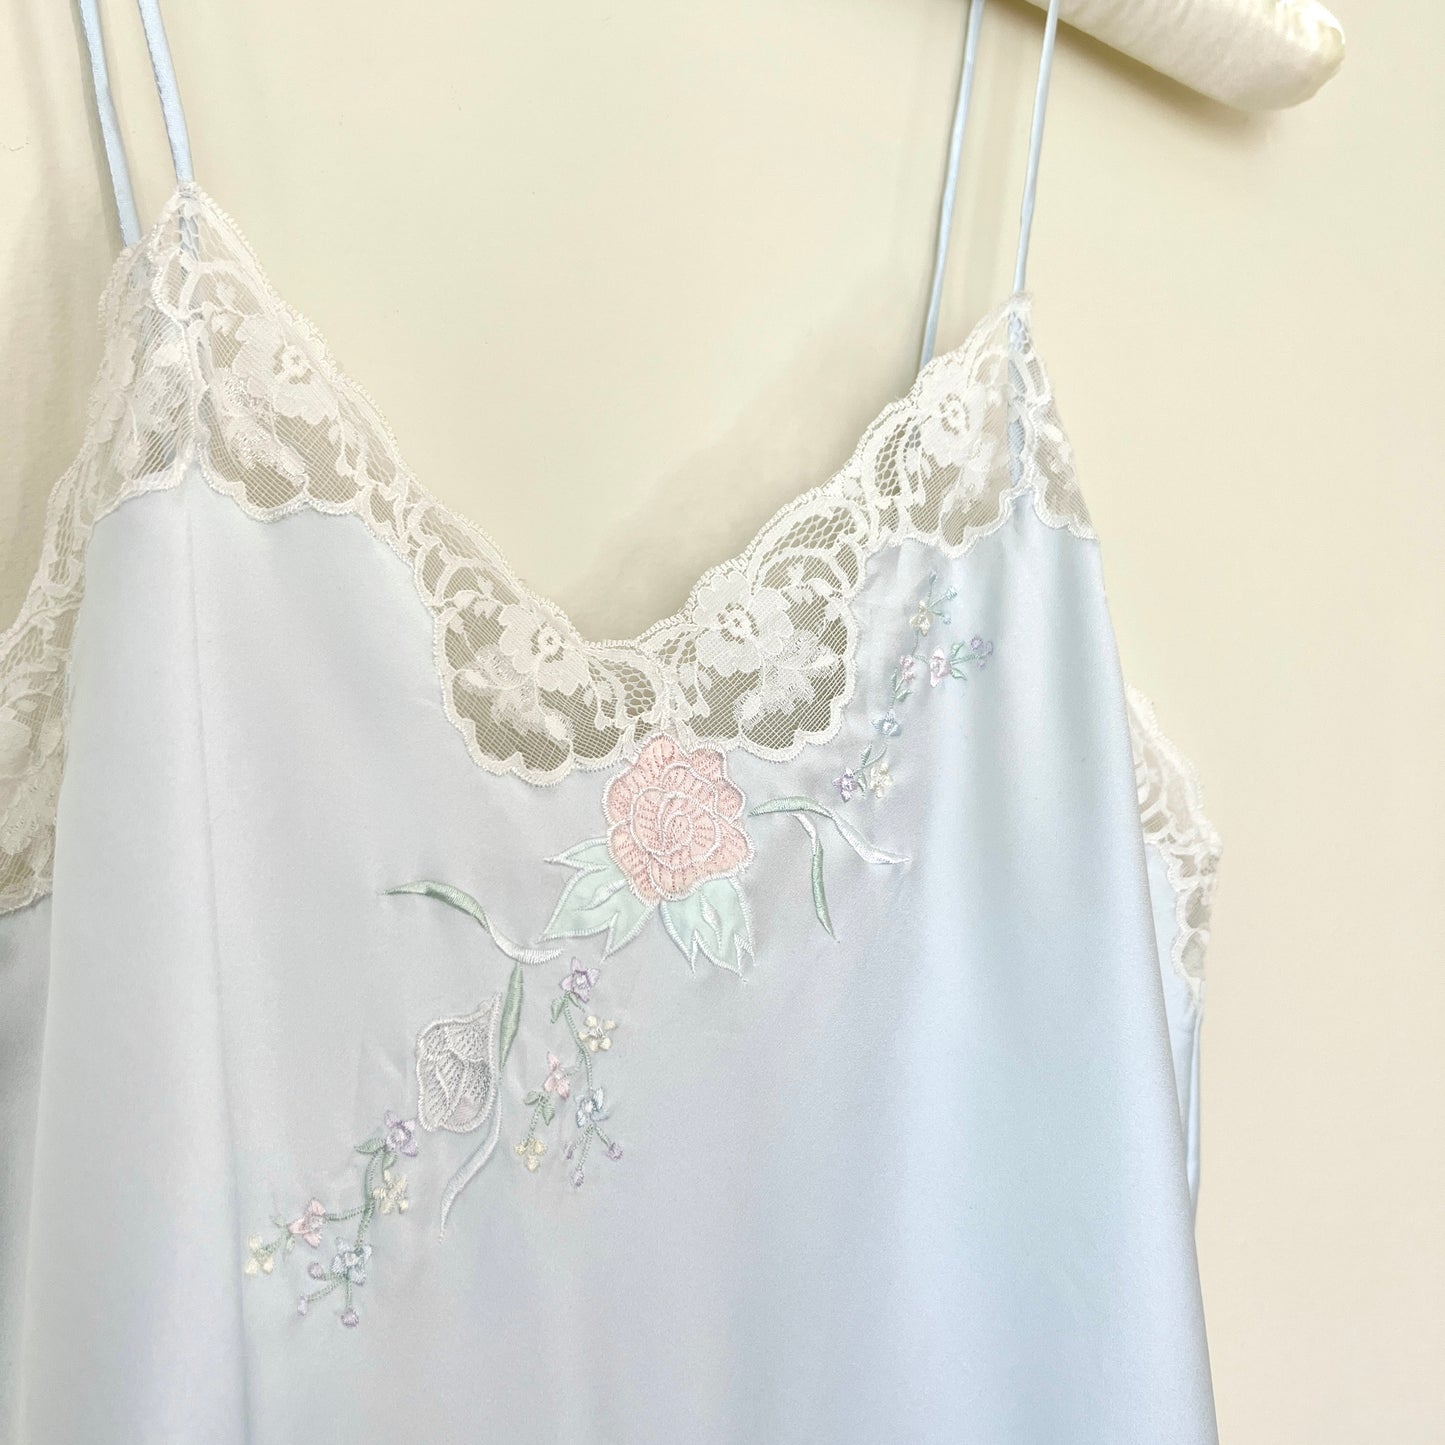 Vintage Pastel Blue Satin Romper featuring Rose Embroidery and Lace Trimmings